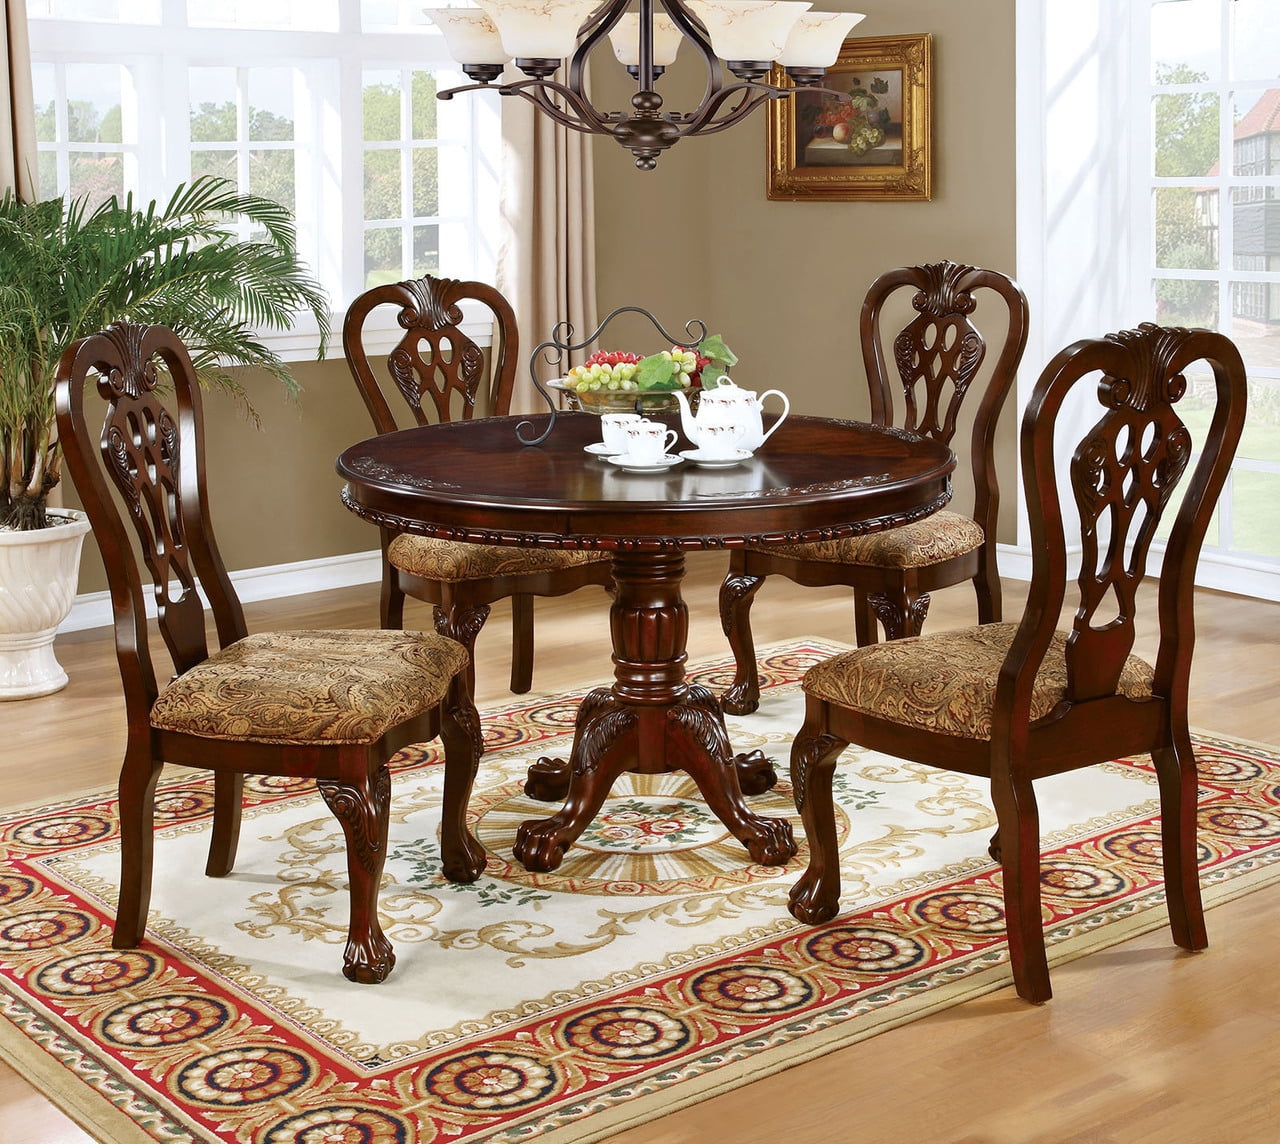 Formal Traditional Antique Dining Room Furniture 5pcs Set Classic Round